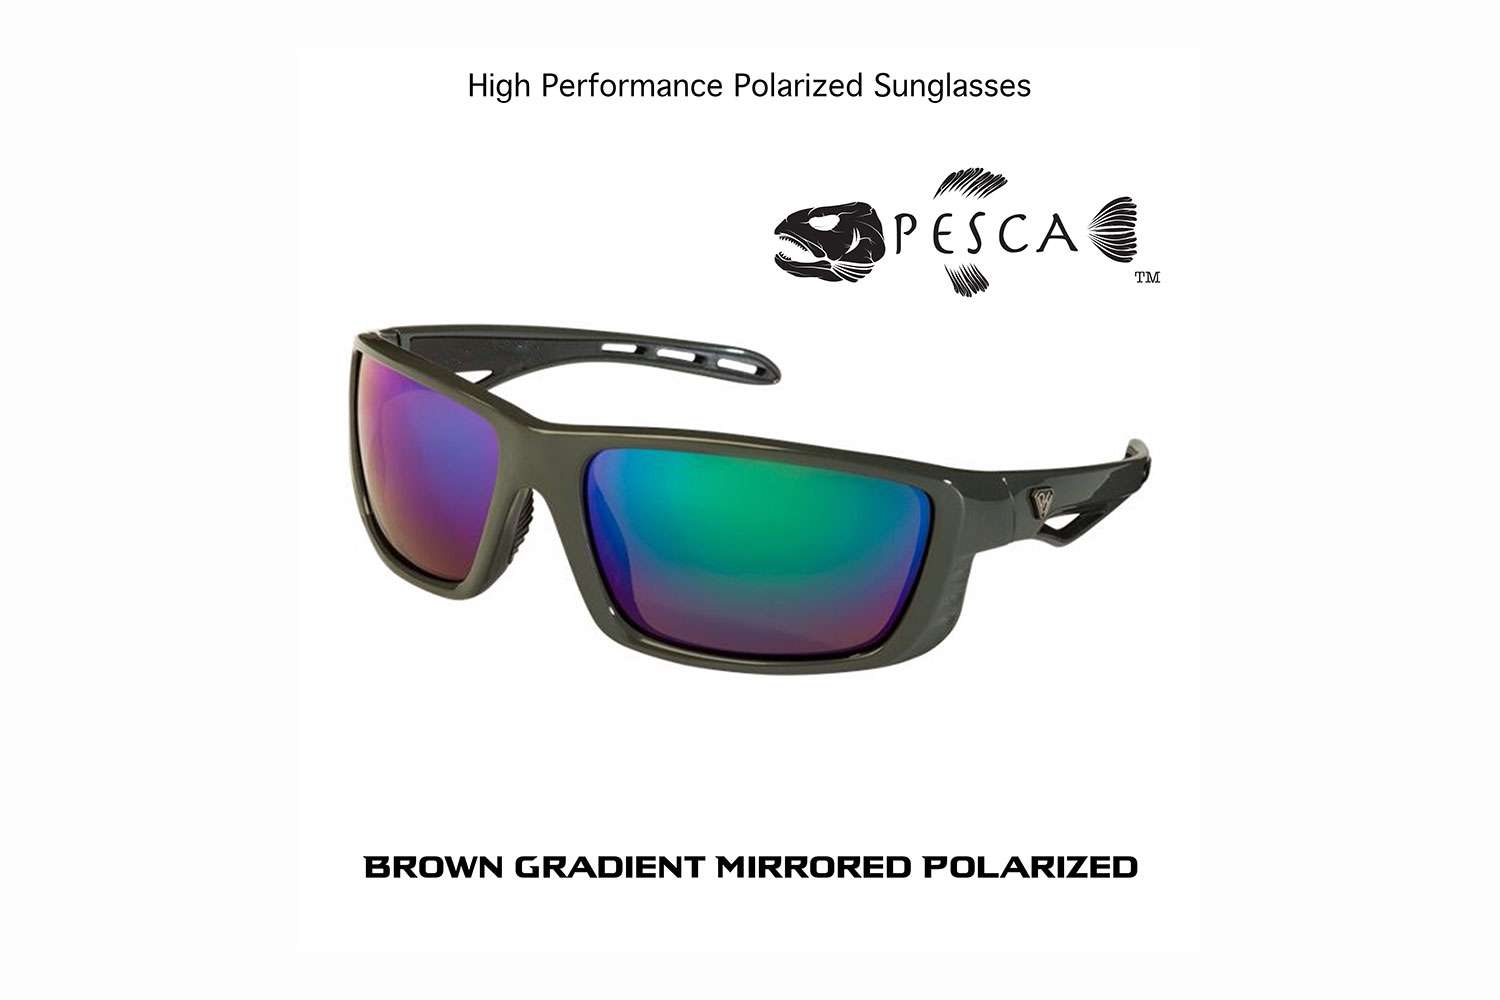 <p><b>Pesca High Performance Sunglasses by Enigma</b></p>
Pesca polarized fishing sunglasses are high-quality glasses at affordable price points and with our exclusive lifetime, no-questions-asked guarantee, there is nothing out there that can compare. Key features include: Polarized lenses reduce glare, impact-resistant TAC lenses protect your eyes from flying objects, lightweight, durable, and comfortable Grilamid frames, anti-slip nose and temple pads, block 100% of the harmful UVA and UVB rays. Built by hand and backed for life. Every pair of Pesca Sunglasses includes a lifetime warranty. No matter what you do to your glasses the company will replace them for $10.00â¦ No questions asked!<br>
<p><b>MSRP: $49.97</b></p>
<a href=